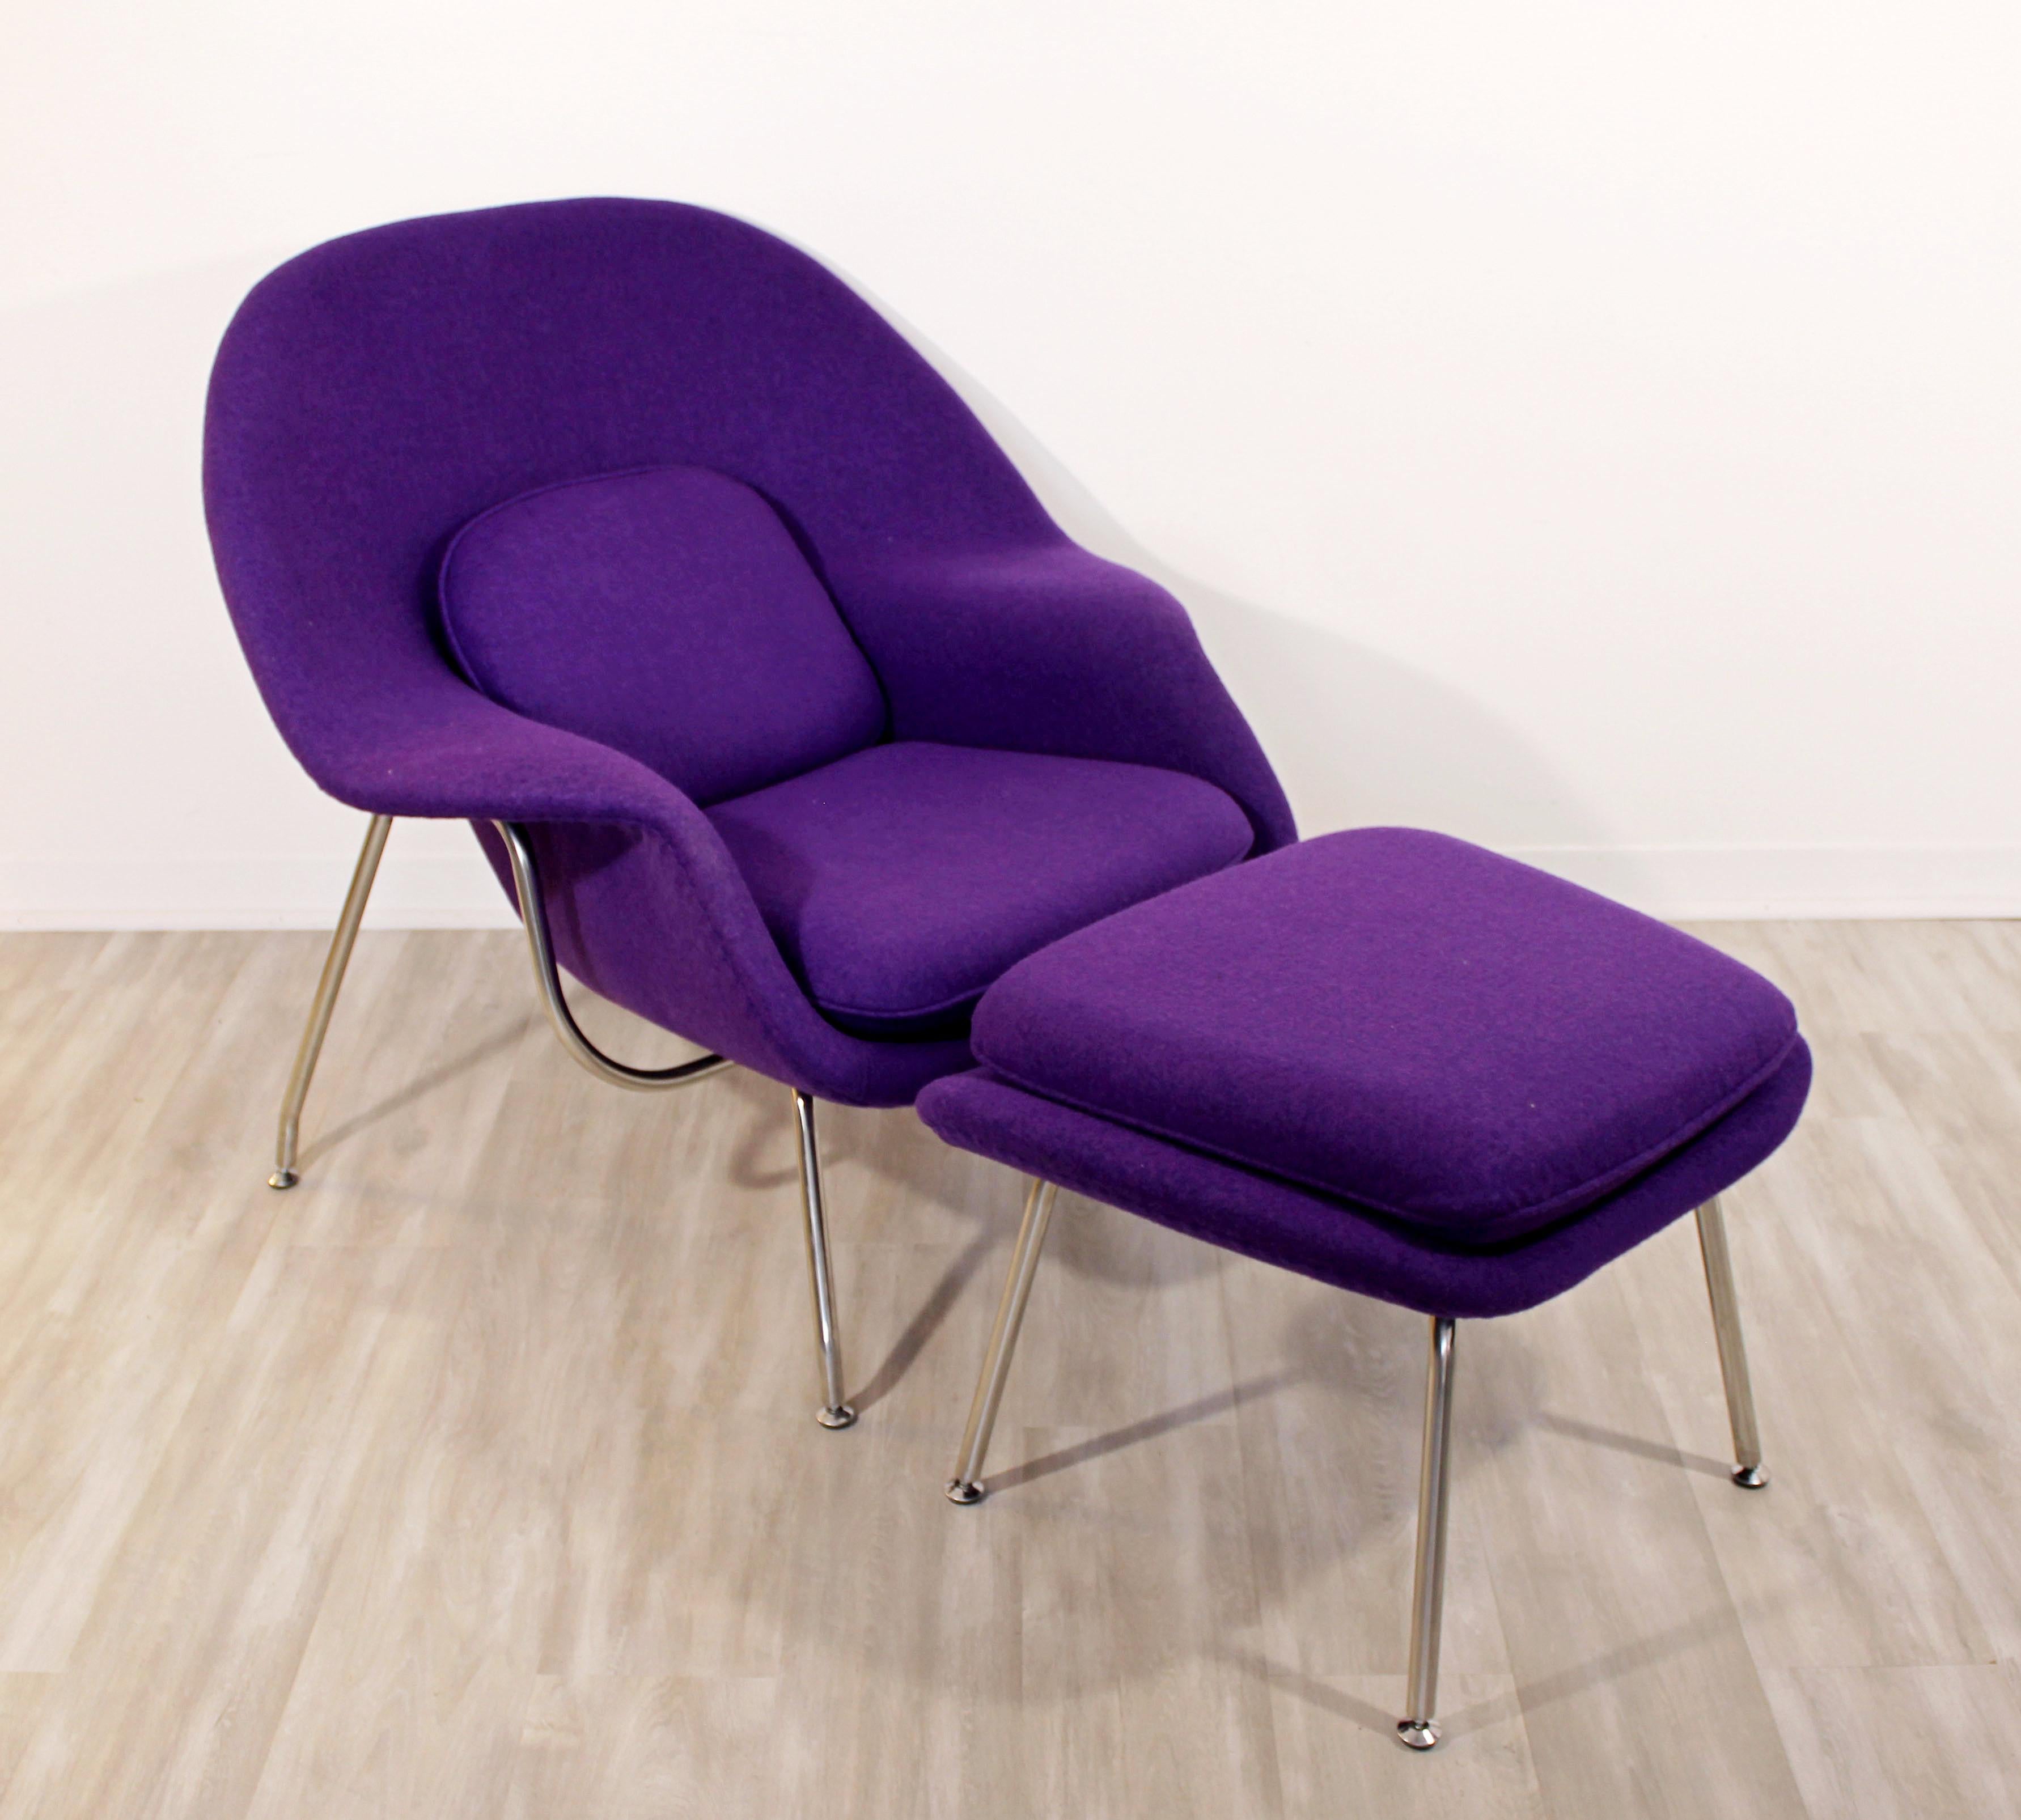 For your consideration is a fabulous, purple womb chair and matching ottoman, in the style of Eero Saarinen for Knoll. Newer production. In excellent condition. The dimensions of the chair are 37